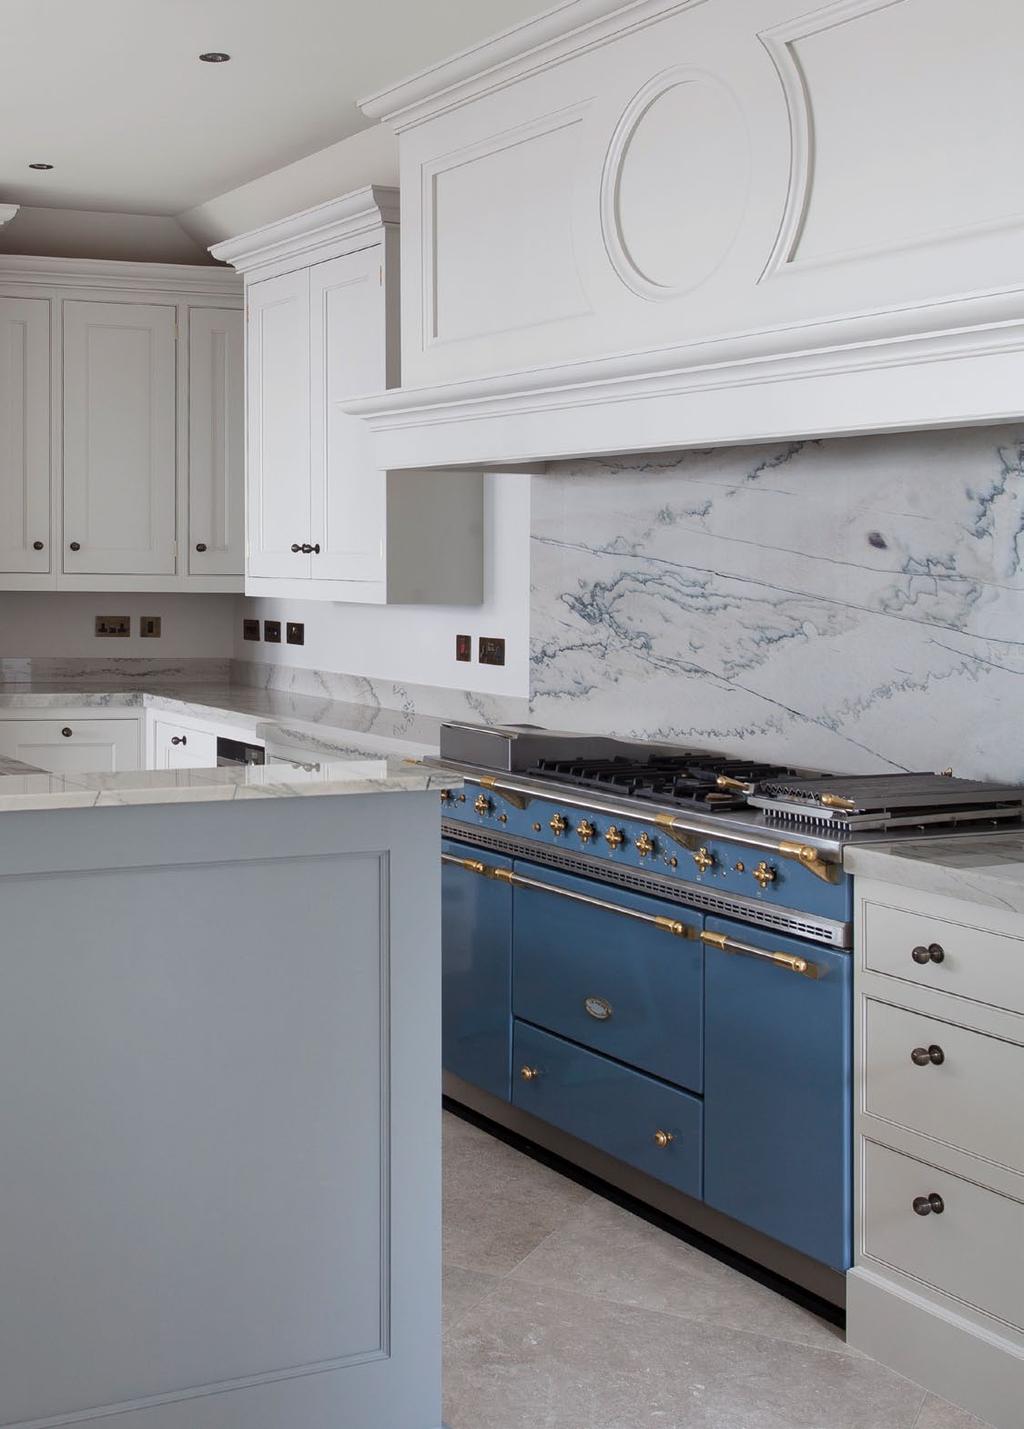 The muted tones continue to the custom crafted kitchen cabinerty.